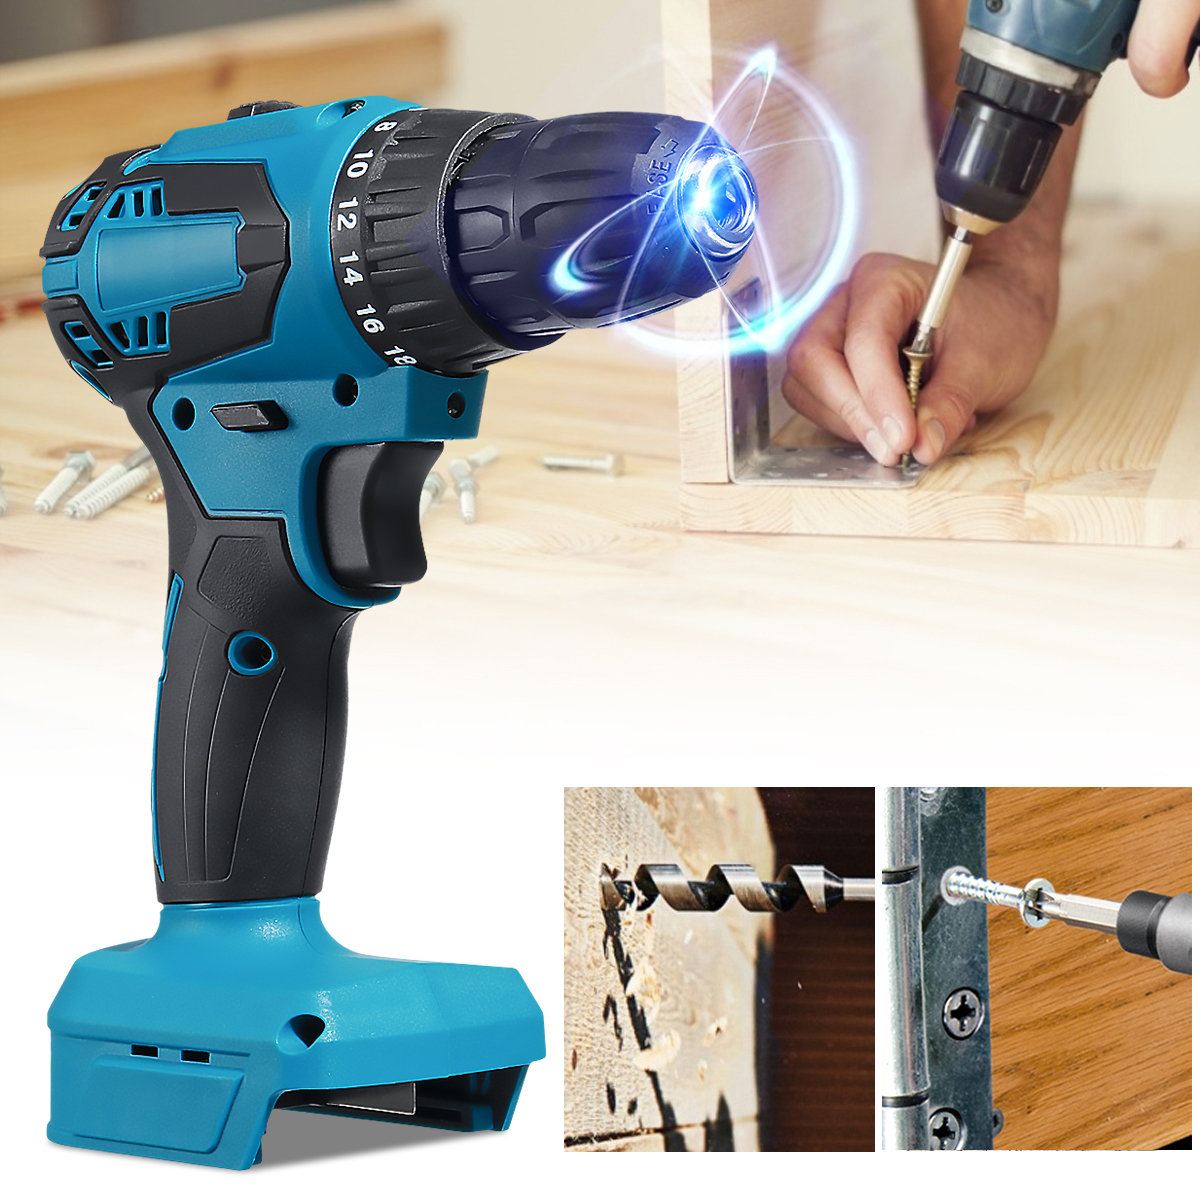 10mm-Rechargable-Electric-Drill-Screwdriver-1350RPM-2-Speed-Impact-Hand-Drill-Fit-Makita-Battery-1882944-2